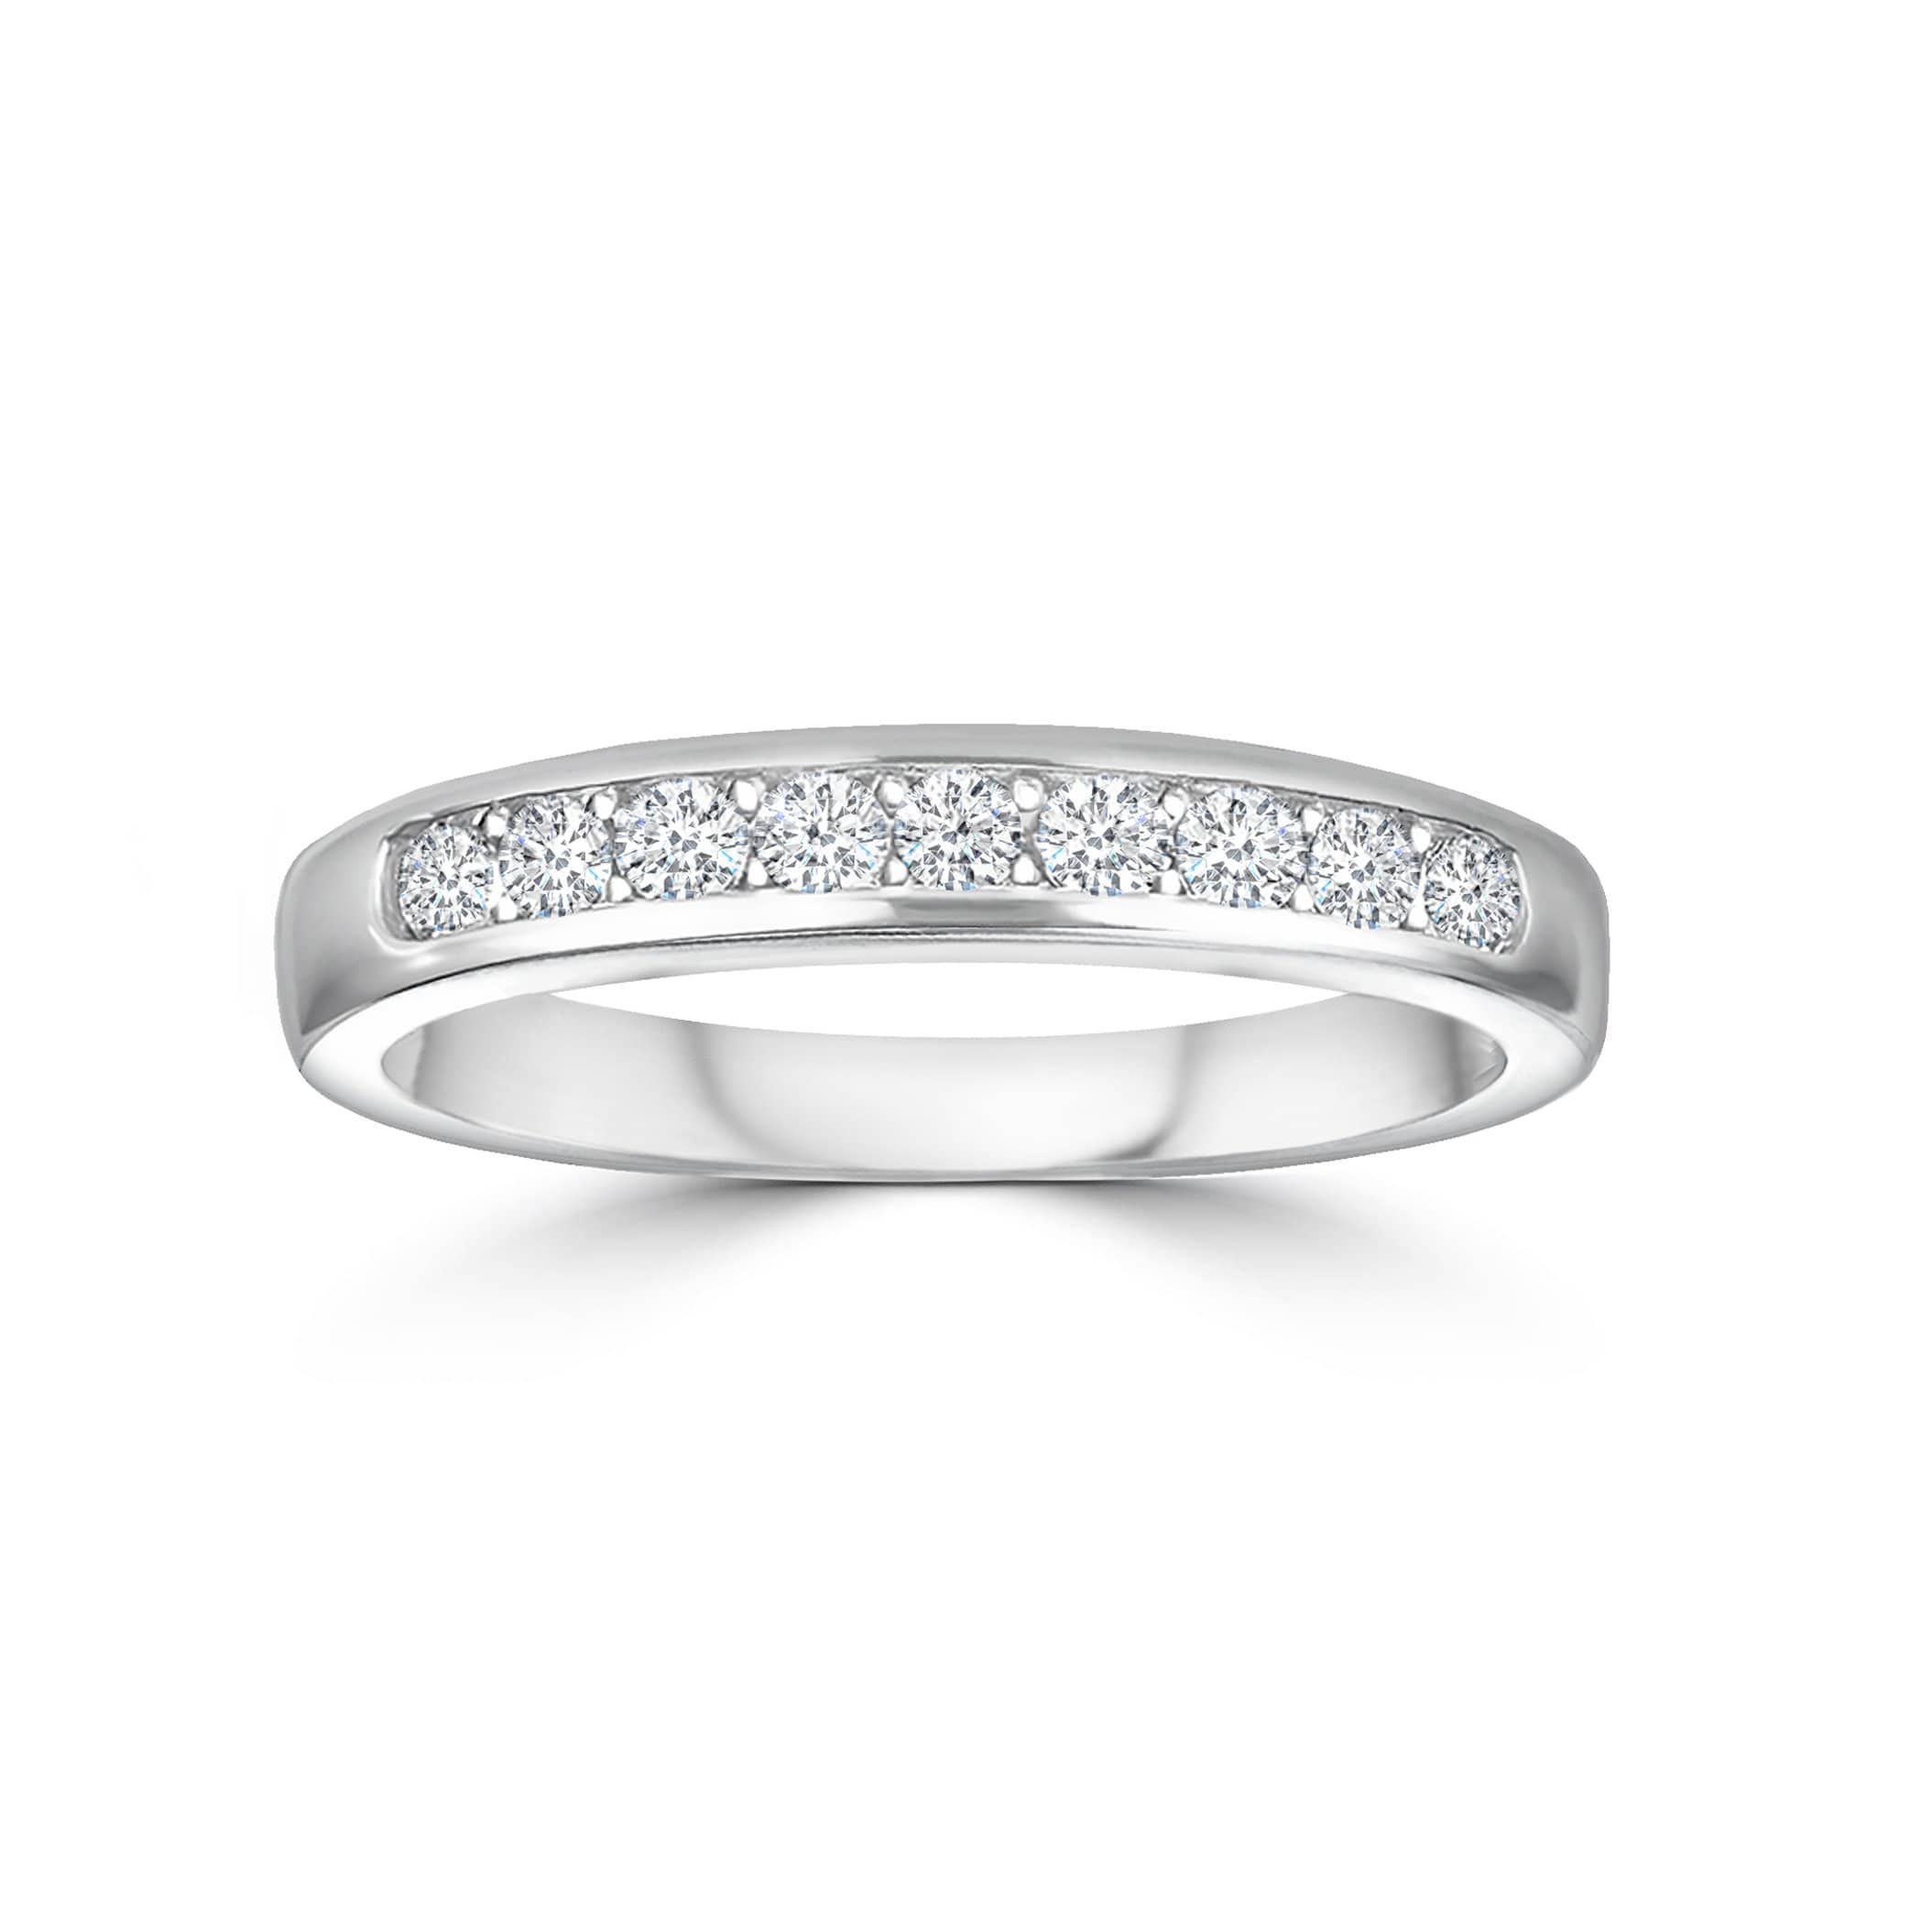 Lynora Jewellery Ring Opulence Channel Set Ring Sterling Silver